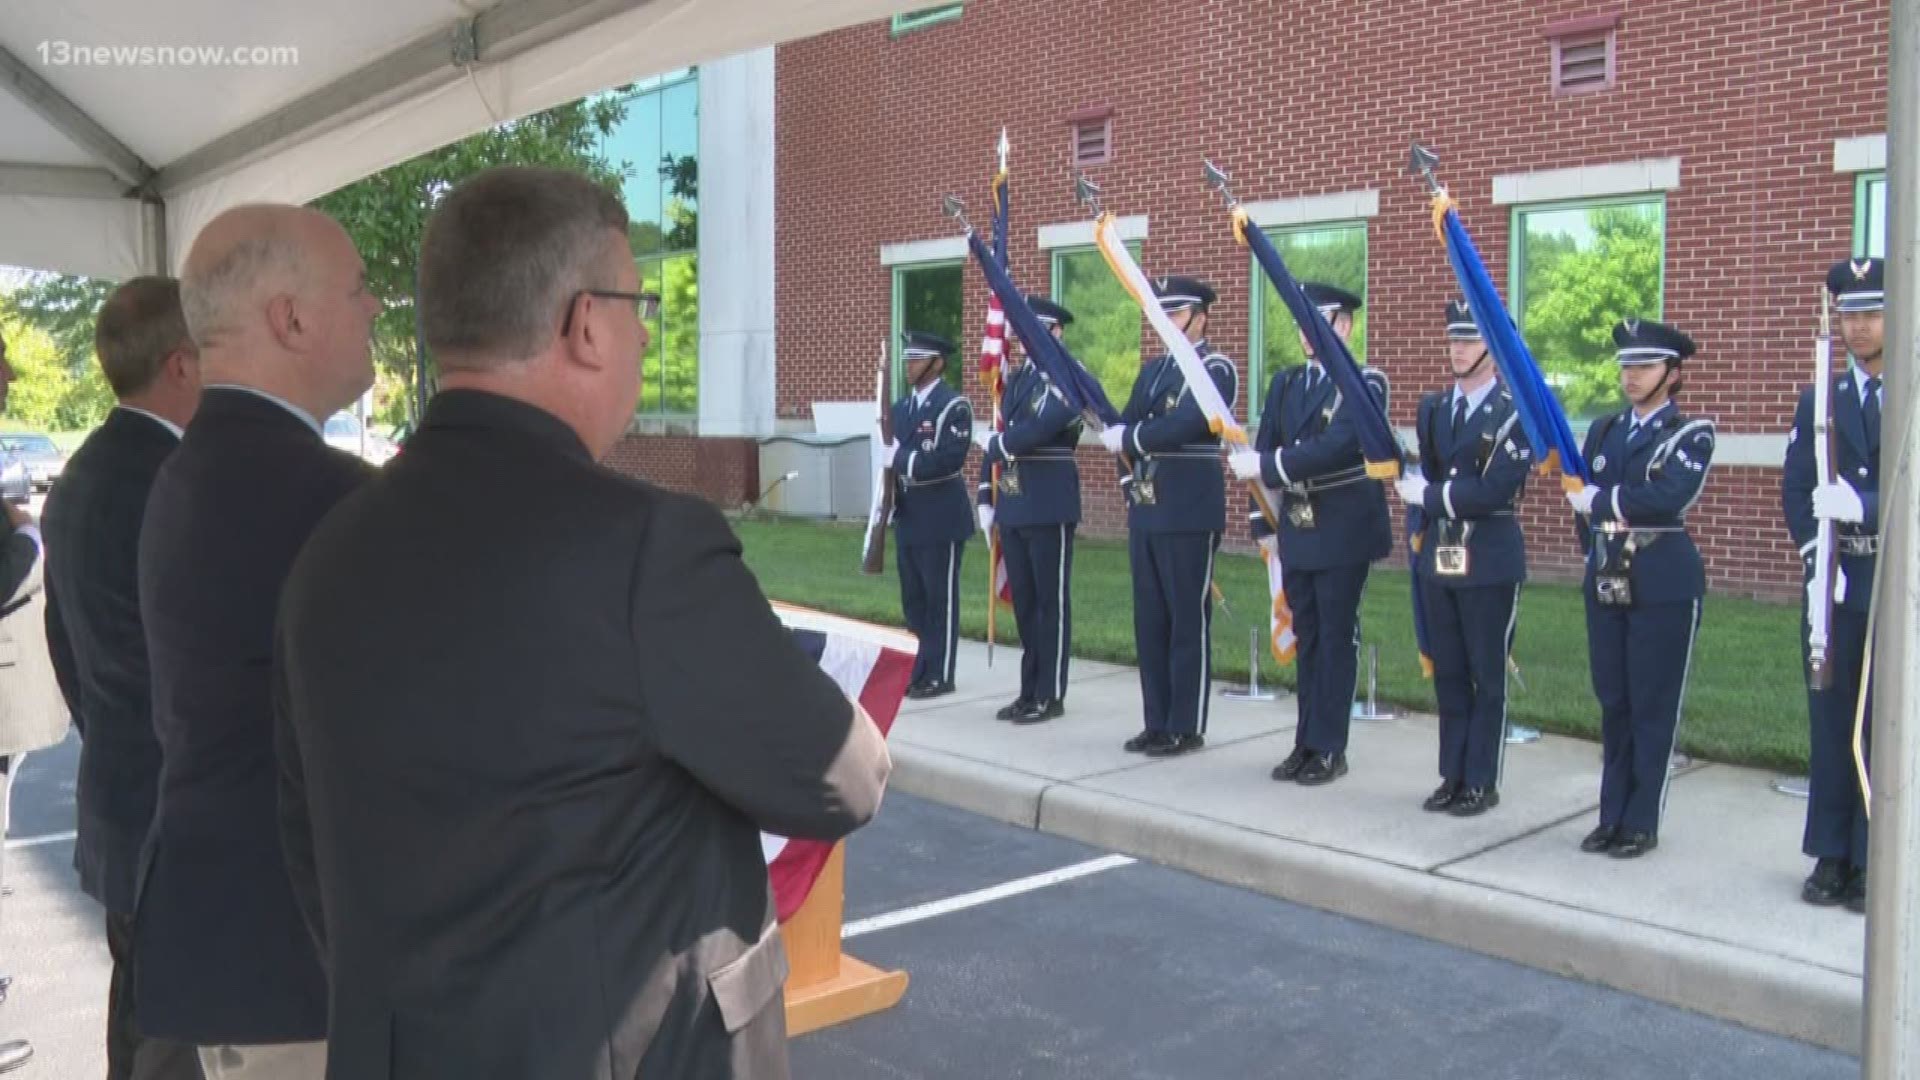 Veterans and their families can get help learning about health benefits, education, job opportunities and more. At the ribbon cutting, Virginia Beach Mayor Bobby Dyer said taking care of veterans is a priority for the community.